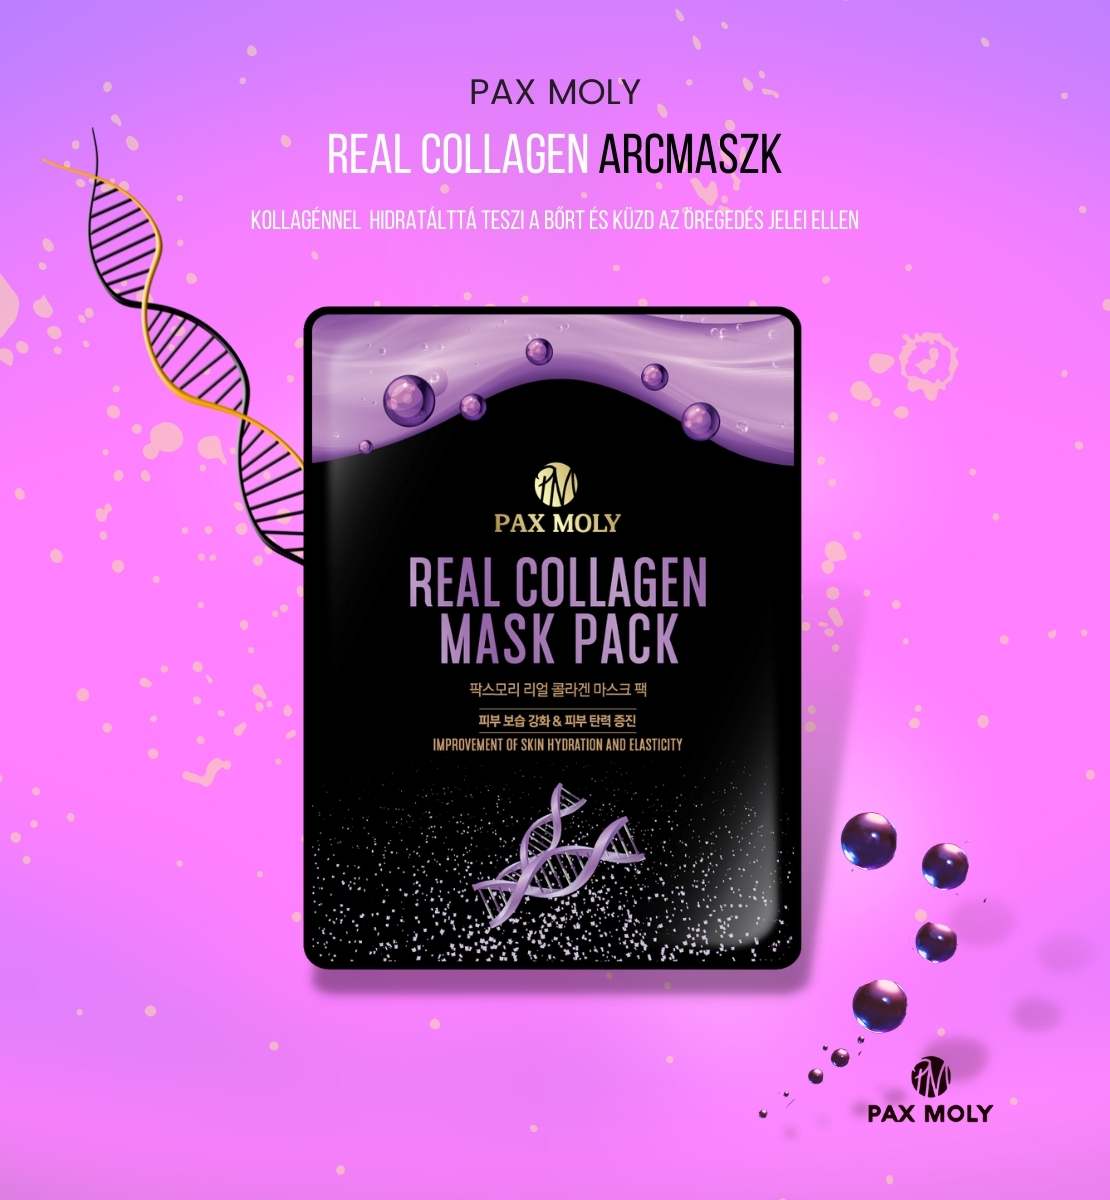 Paxmoly-real-collagen-arcmaszk